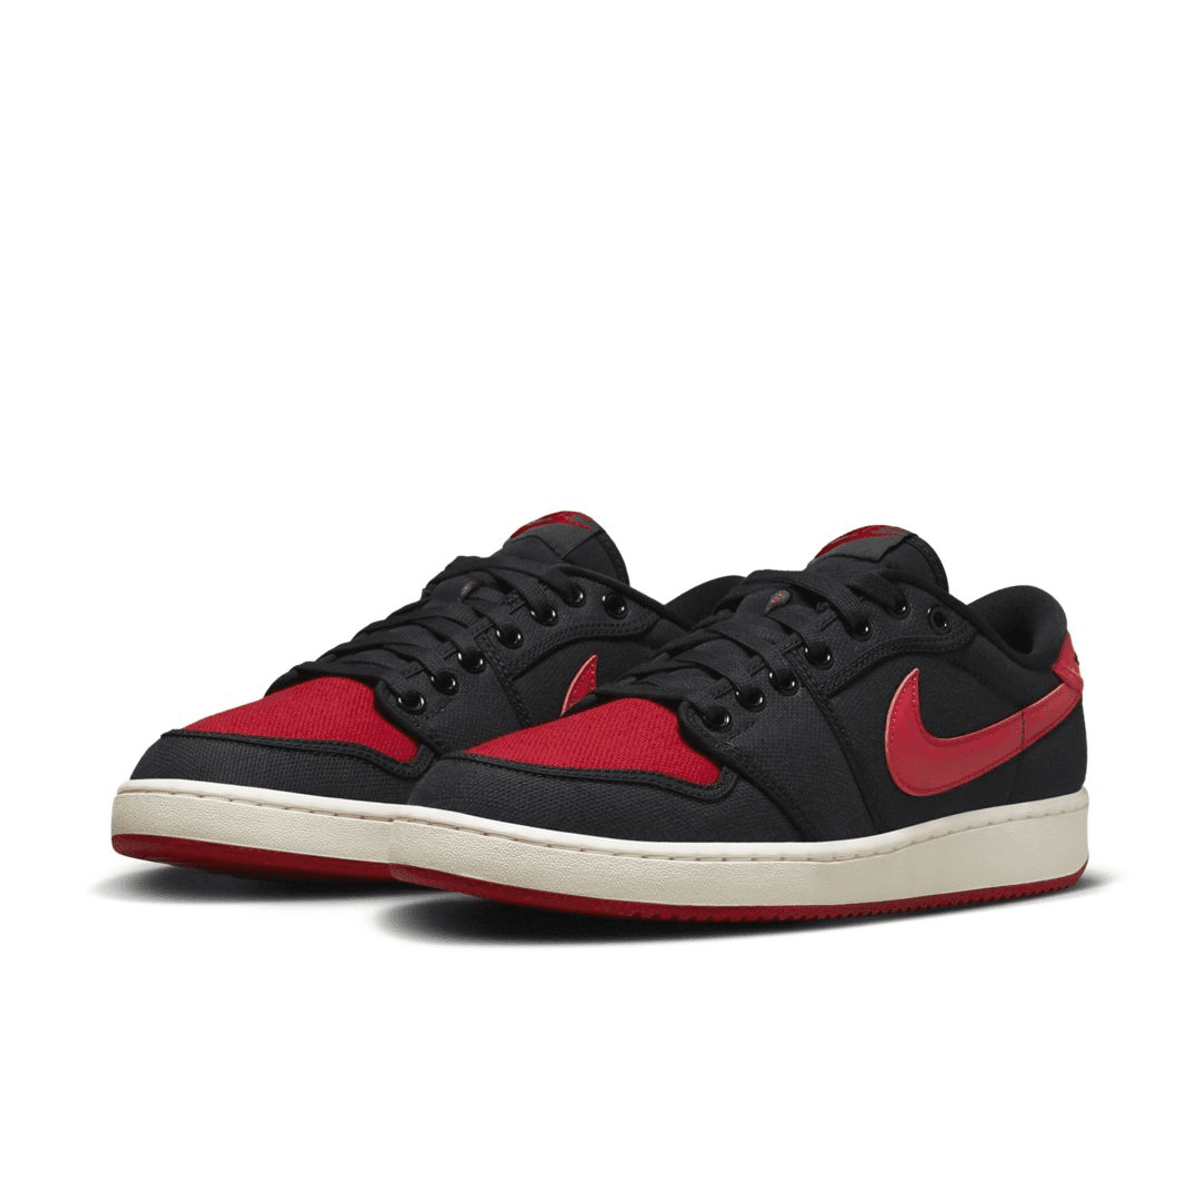 The Nike AJKO Low "Bred" To Release August 23rd